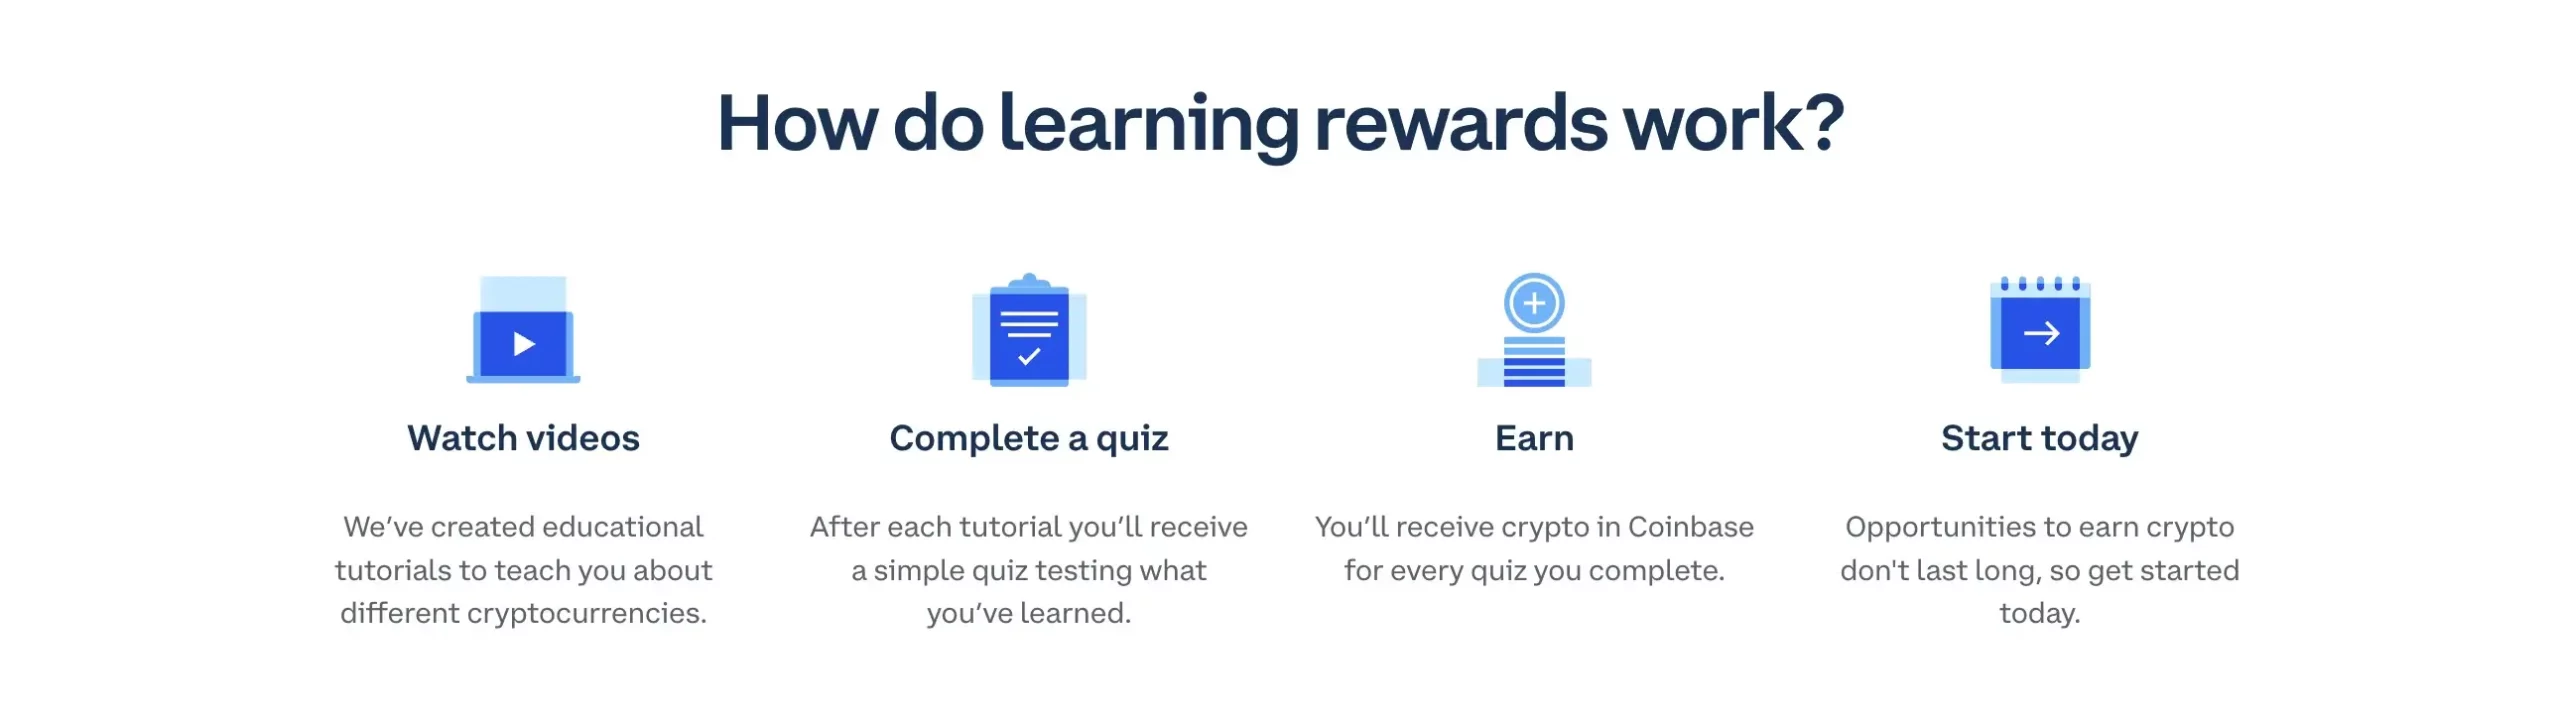 How Do Learning Rewards Work